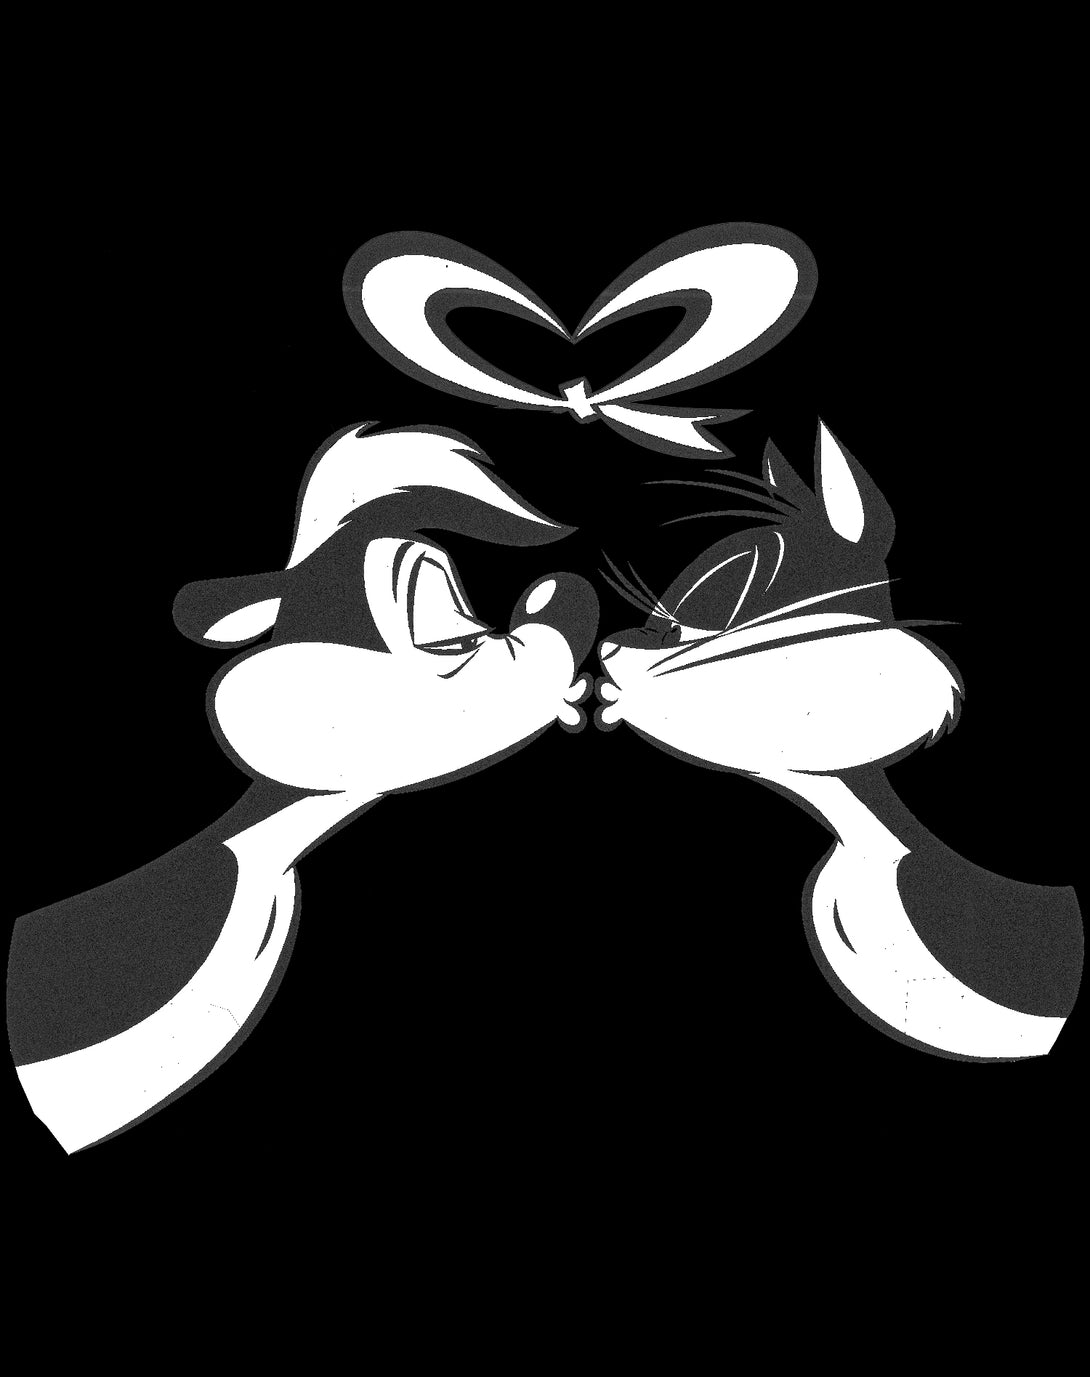 Looney Tunes Pepe Le Pew Valentines Kiss Official Women's T-Shirt Black - Urban Species Design Close Up